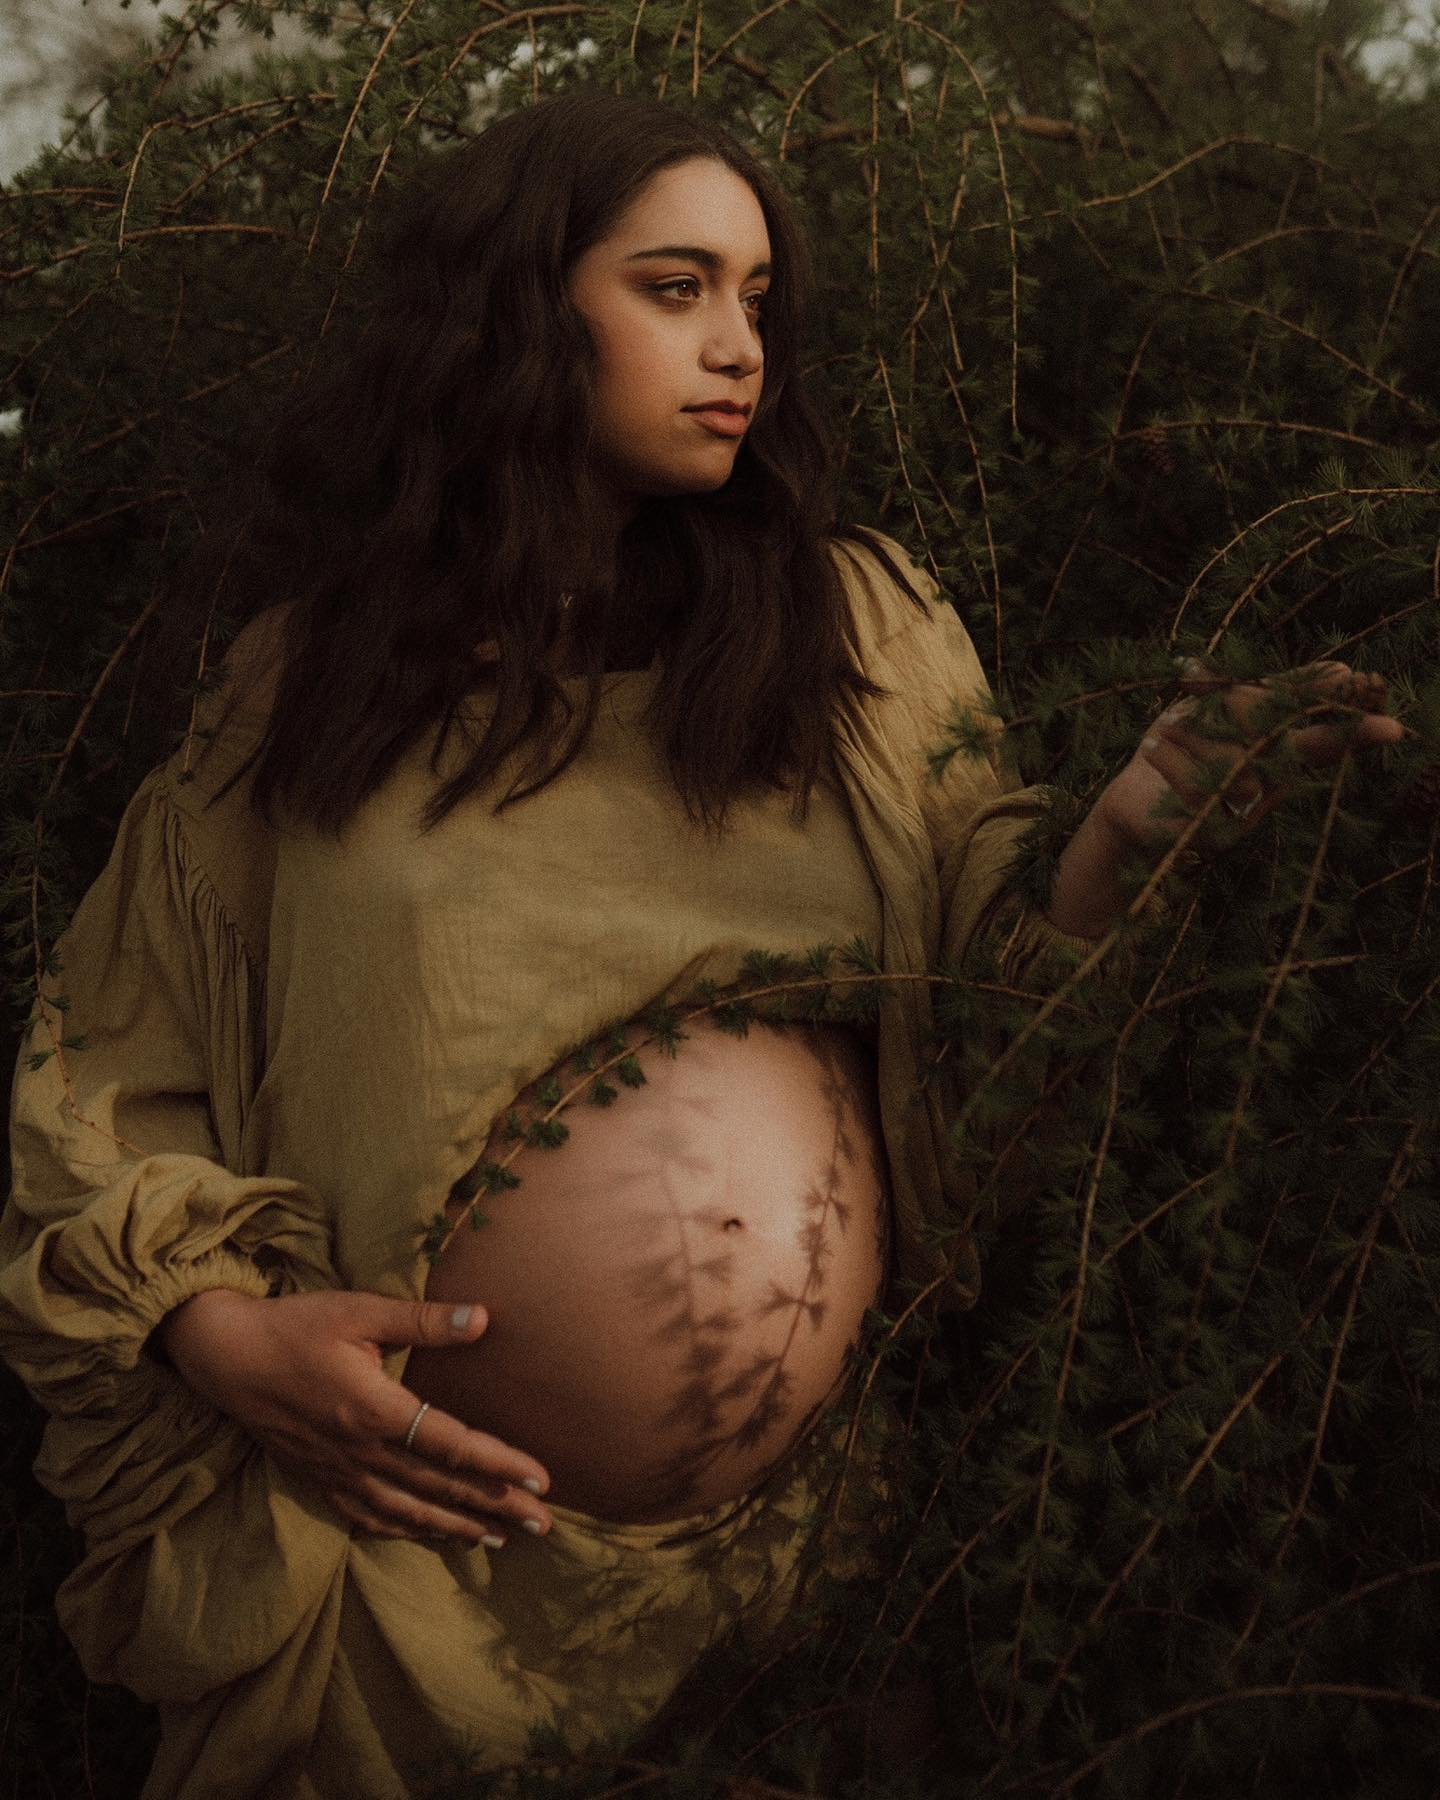 I hope the spring brought you sun that warmed you between the cutting breeze and budding trees to remind you new seasons of life are rolling in. Treasure. 

#kentmaternityphotographer #londonmaternityphotographer #kentfamilyphotographer